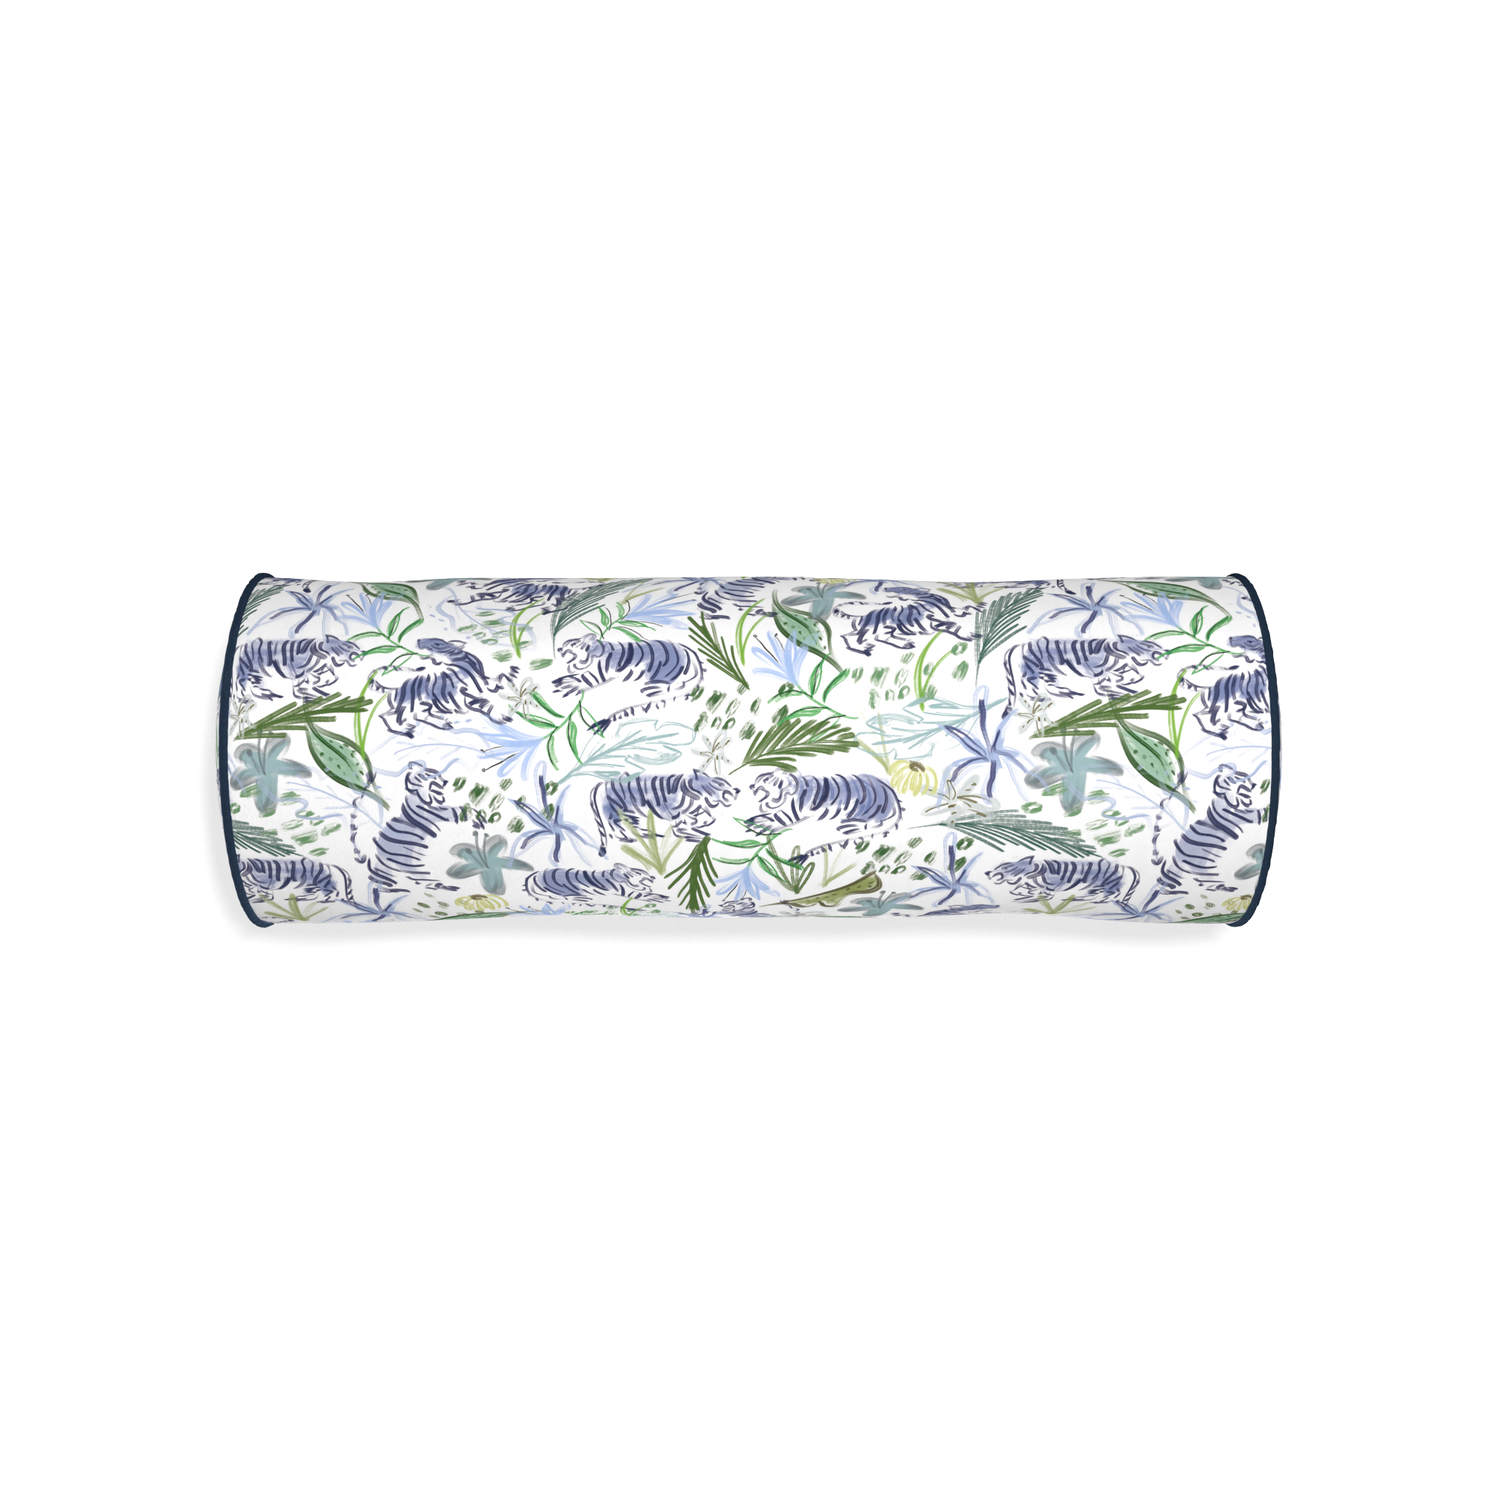 Bolster frida green custom green tigerpillow with c piping on white background